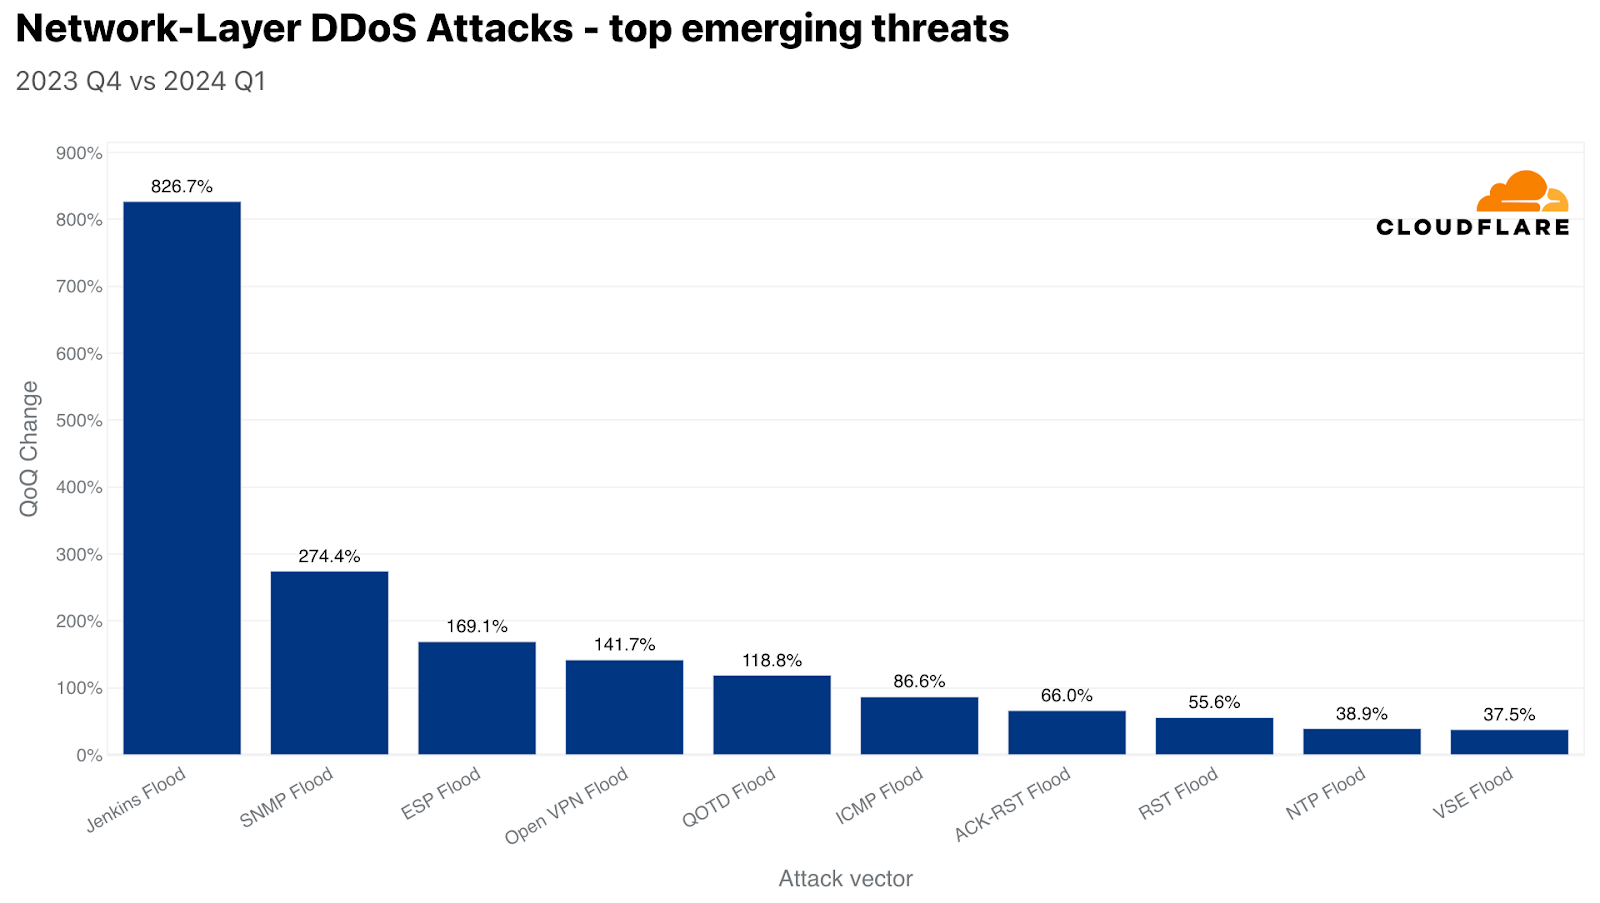 Attack vectors that experienced the largest growth QoQ